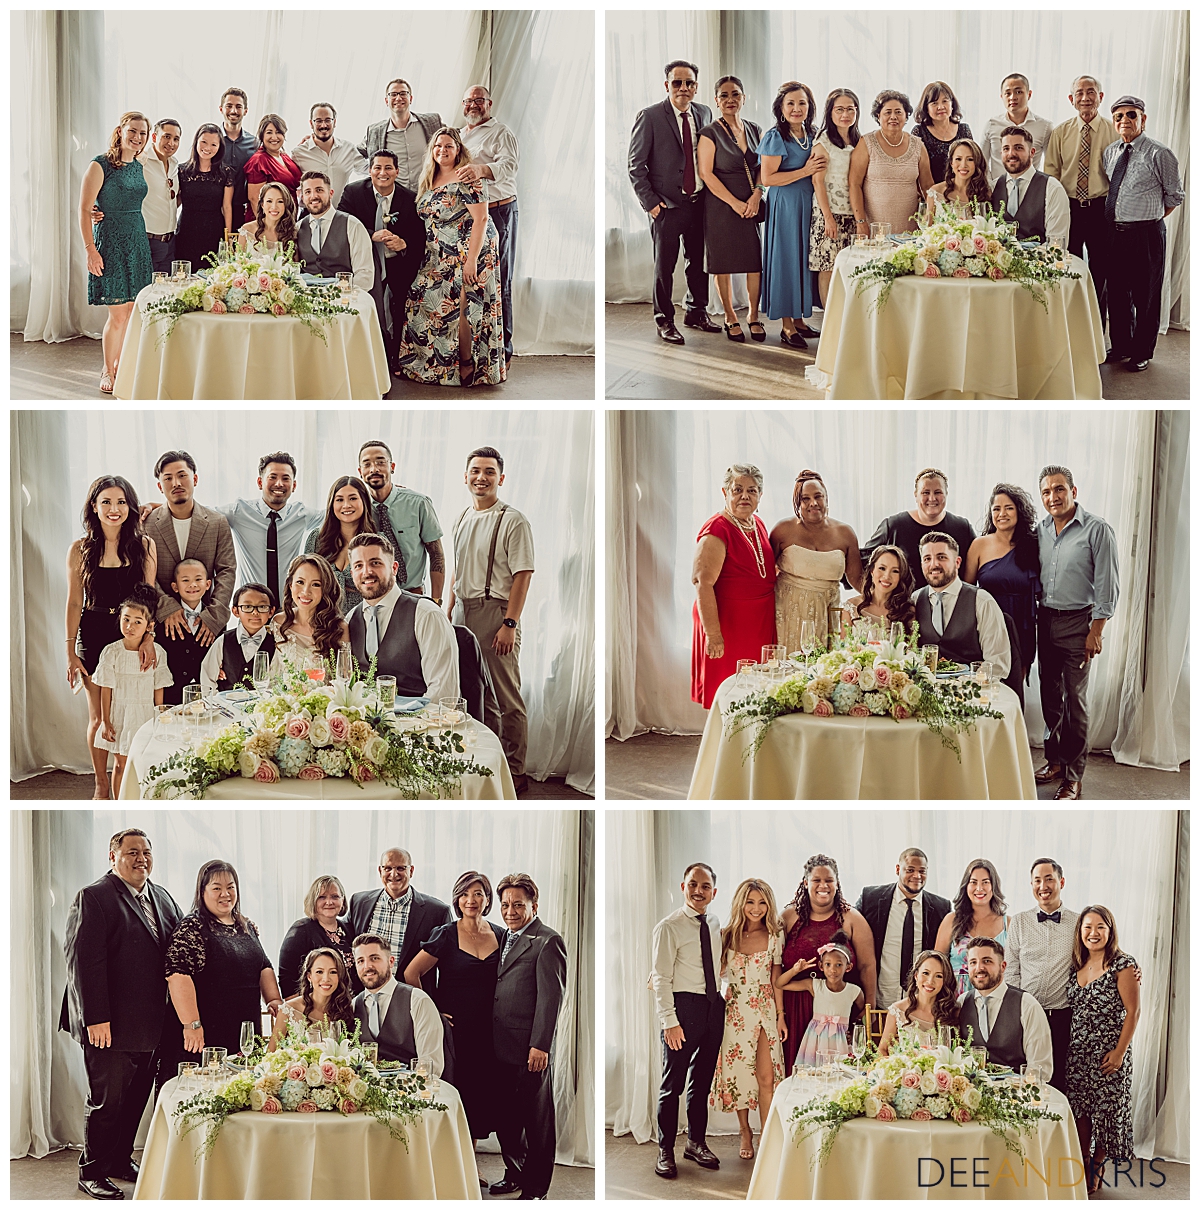 Six images of wedding guests gathered around bride and groom who are seated at their table.